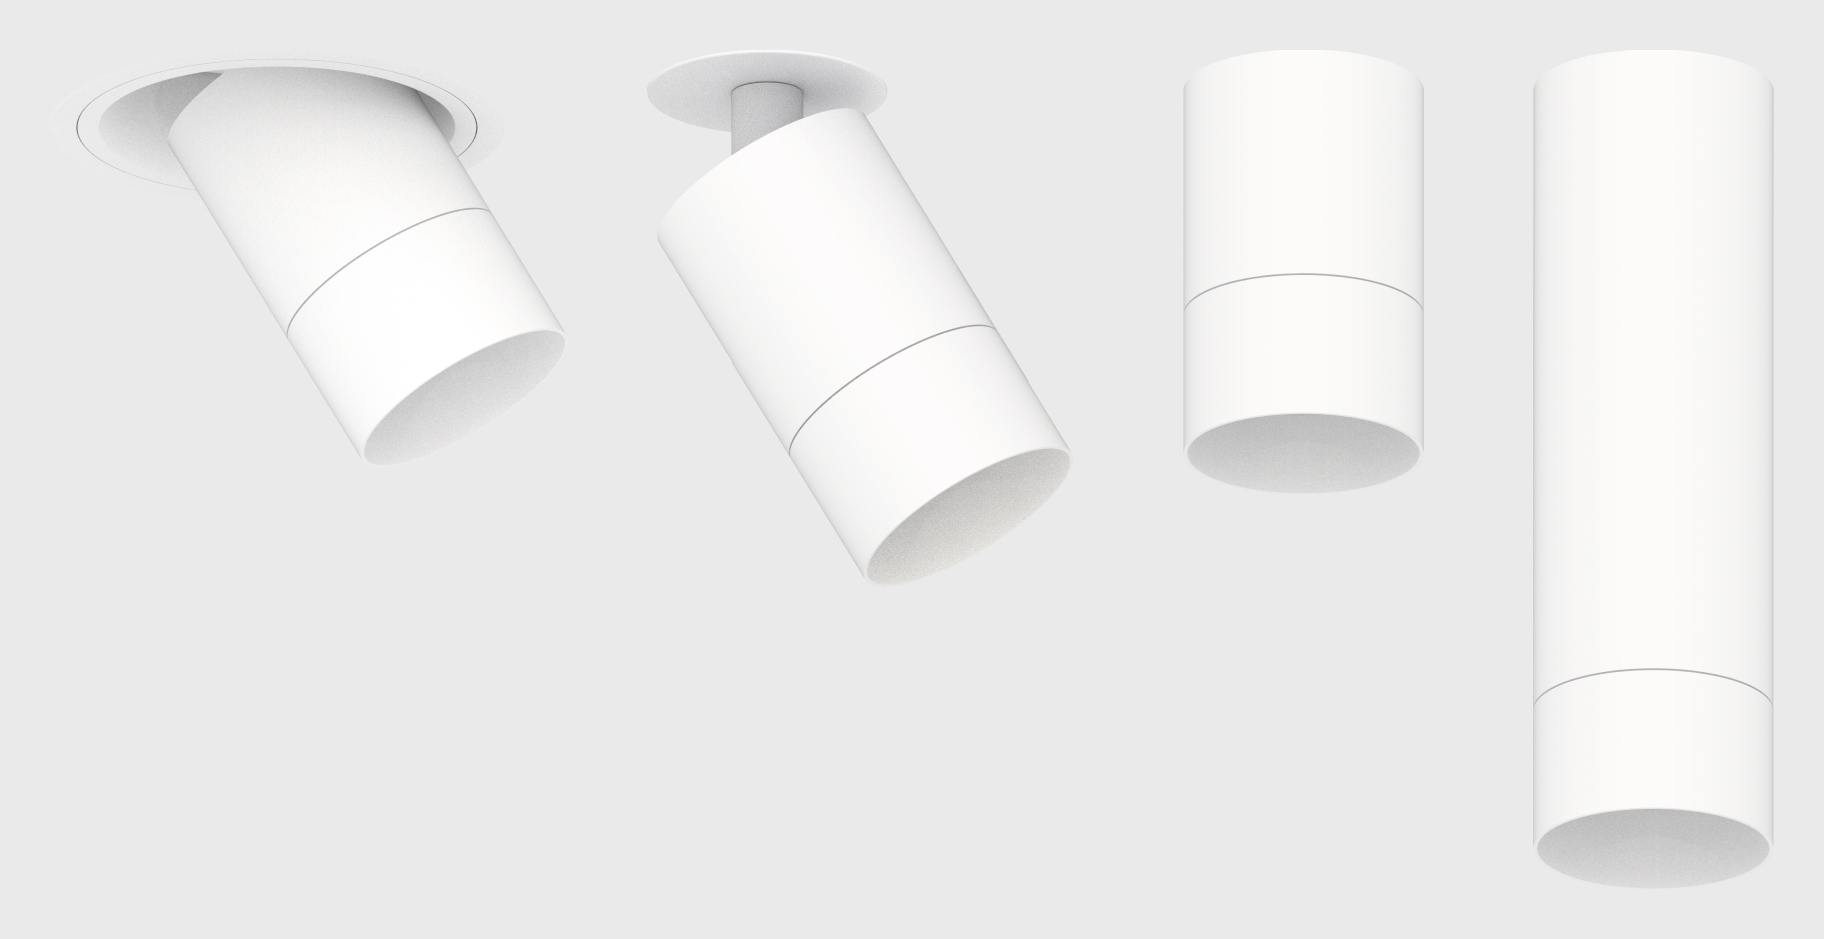 Our Index 60mm Range of ceiling mounted fixtures